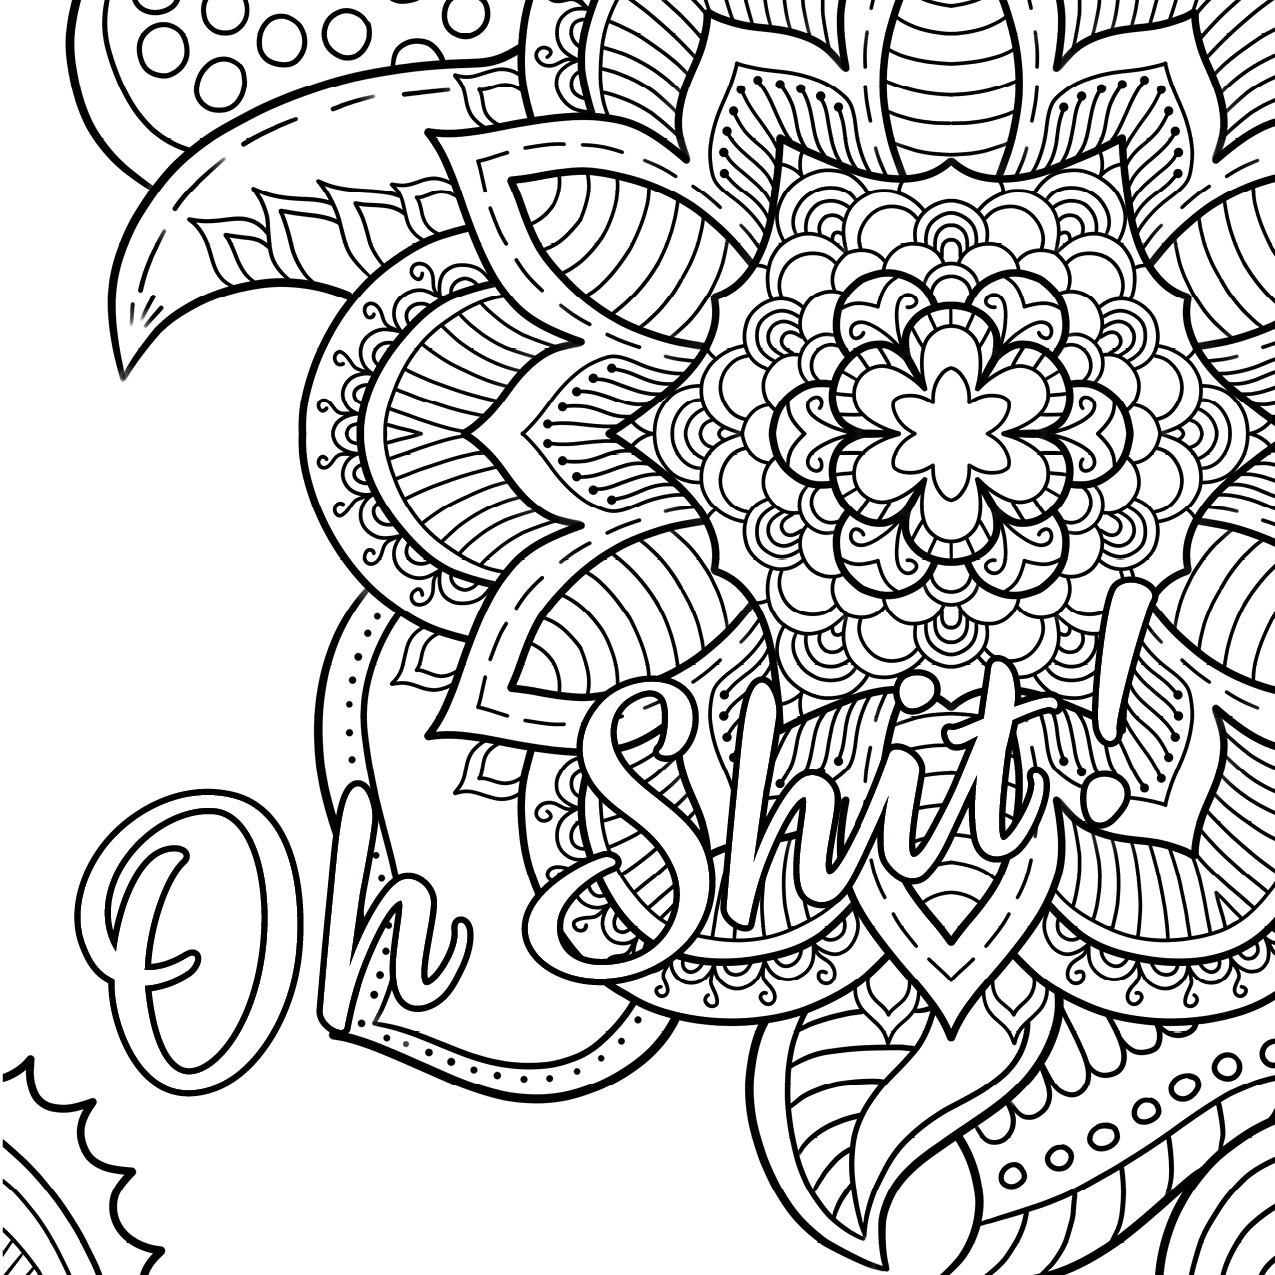 Inappropriate Coloring Pages For Adults
 Oh Shit Free Coloring Page Swear Word Coloring Book